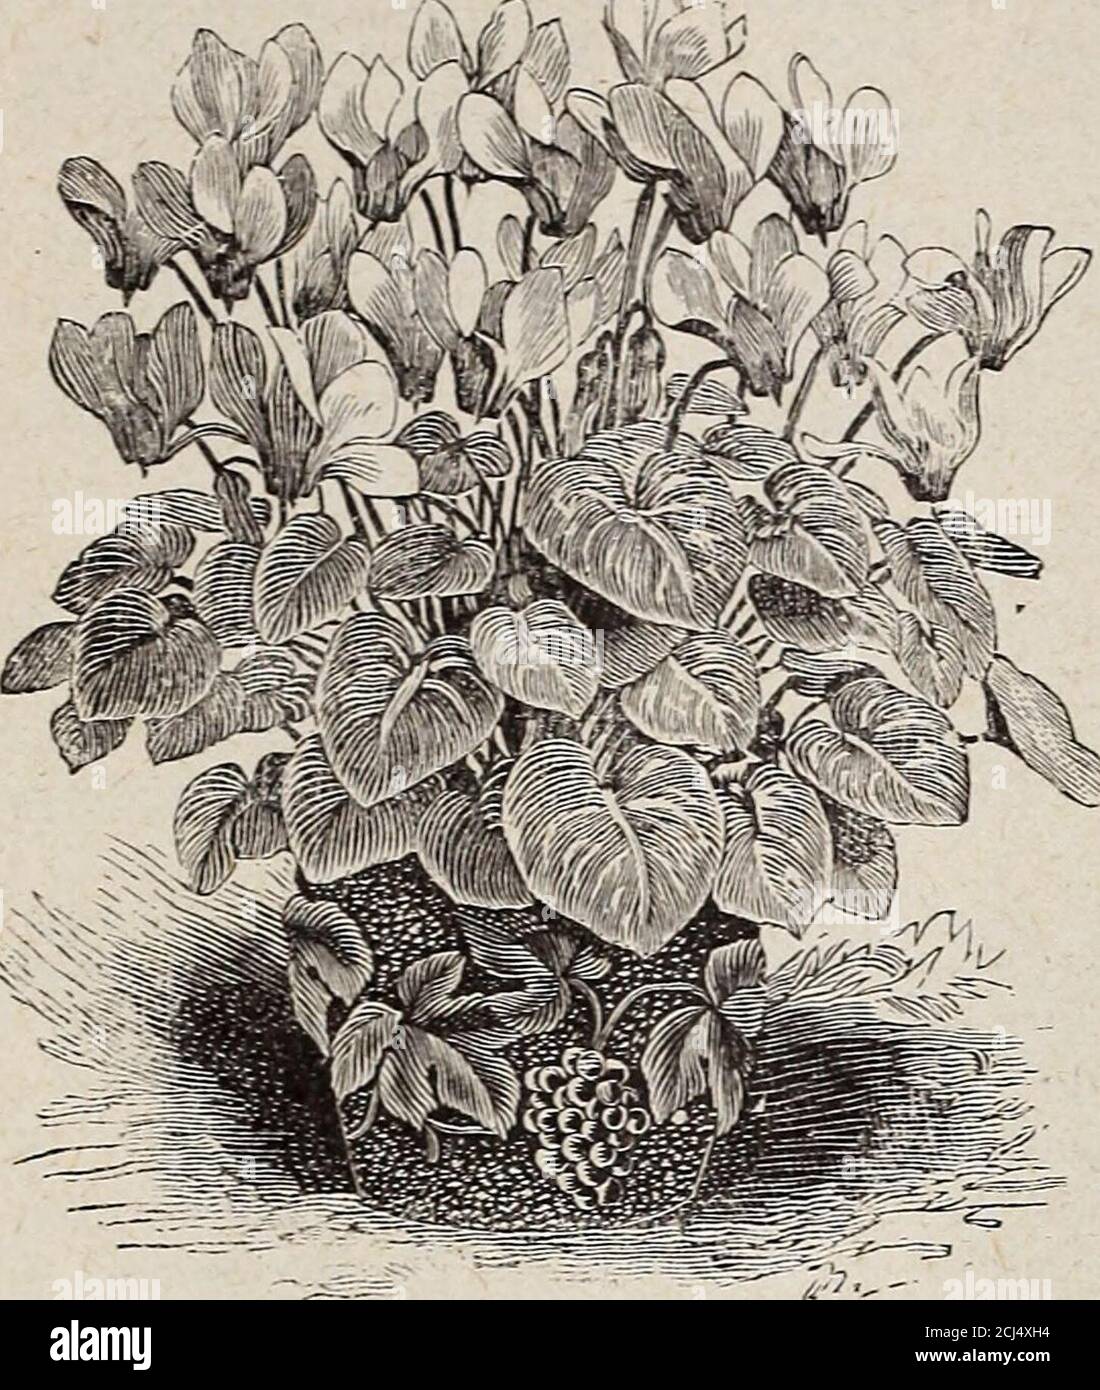 . Horsford's descriptive catalogue of hardy ornamentals herbaceous plants bulbs ferns shrubs and vines . F. H. Horsford, Charlotte, Vermont. CRINUMMongifolium. A valuable species from the Cape of Good Hope. Flowers, 6 to 8 in an umbel iVz inches long ; w. hite, flushed with pink inside. Large bulbs, 50 cts. each ; small, youngbulbs, 20 cts. CYCLAMEN, European. The common Swiss autumn-flowering Cyclamen. Flowers bright rose, free-bloom-ing when established. Fine for rock-work. 12 cts.each, two for 20 cts.C. hederaefolium. A strong species, varying in foliageand in color of flowers, which are of Stock Photo